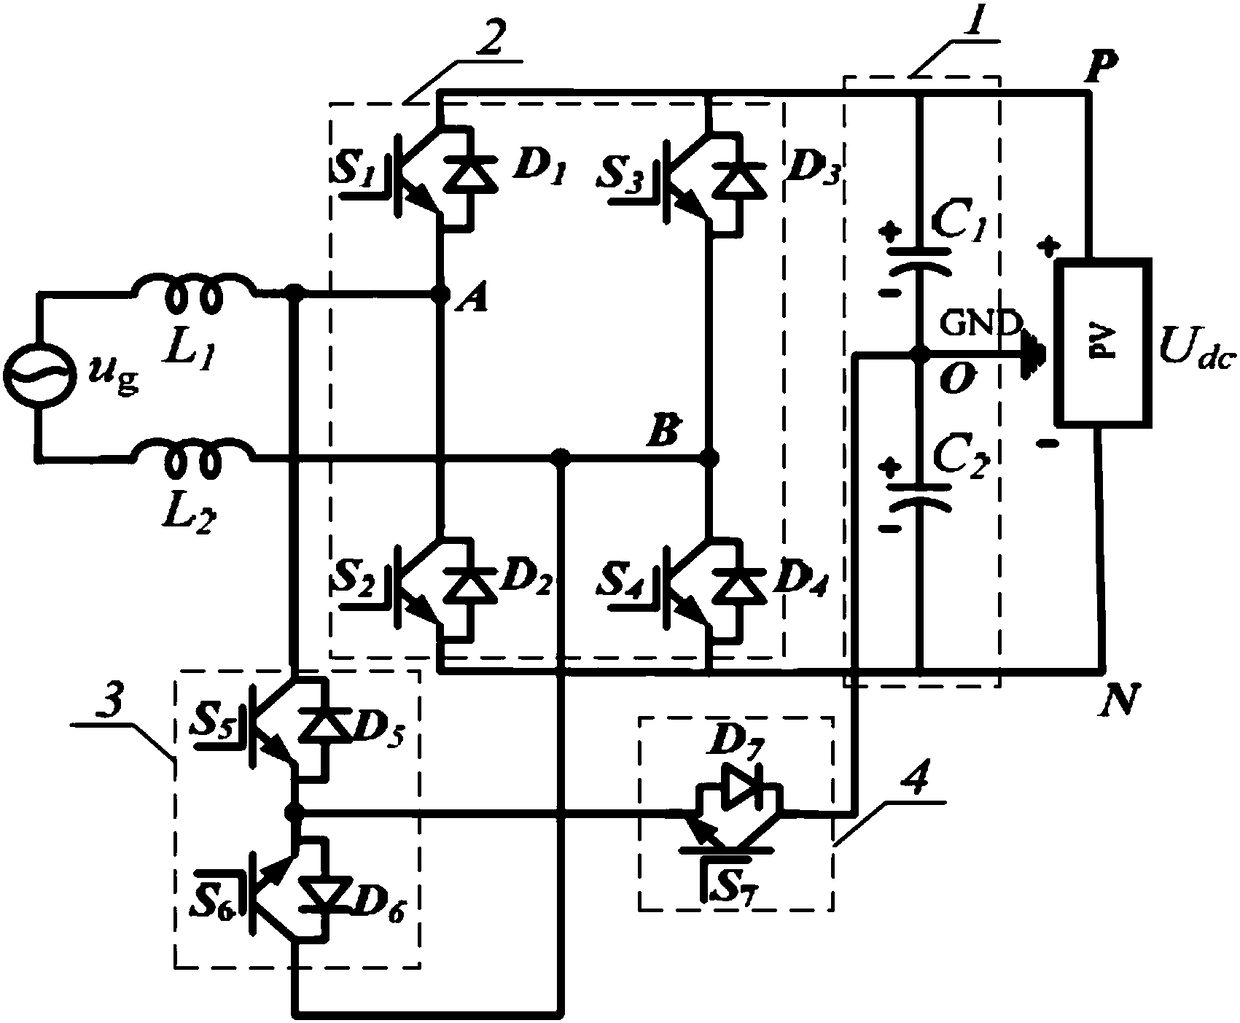 Optimal modulation method and system for non-isolated AC bypass type single-phase grid-connected inverter